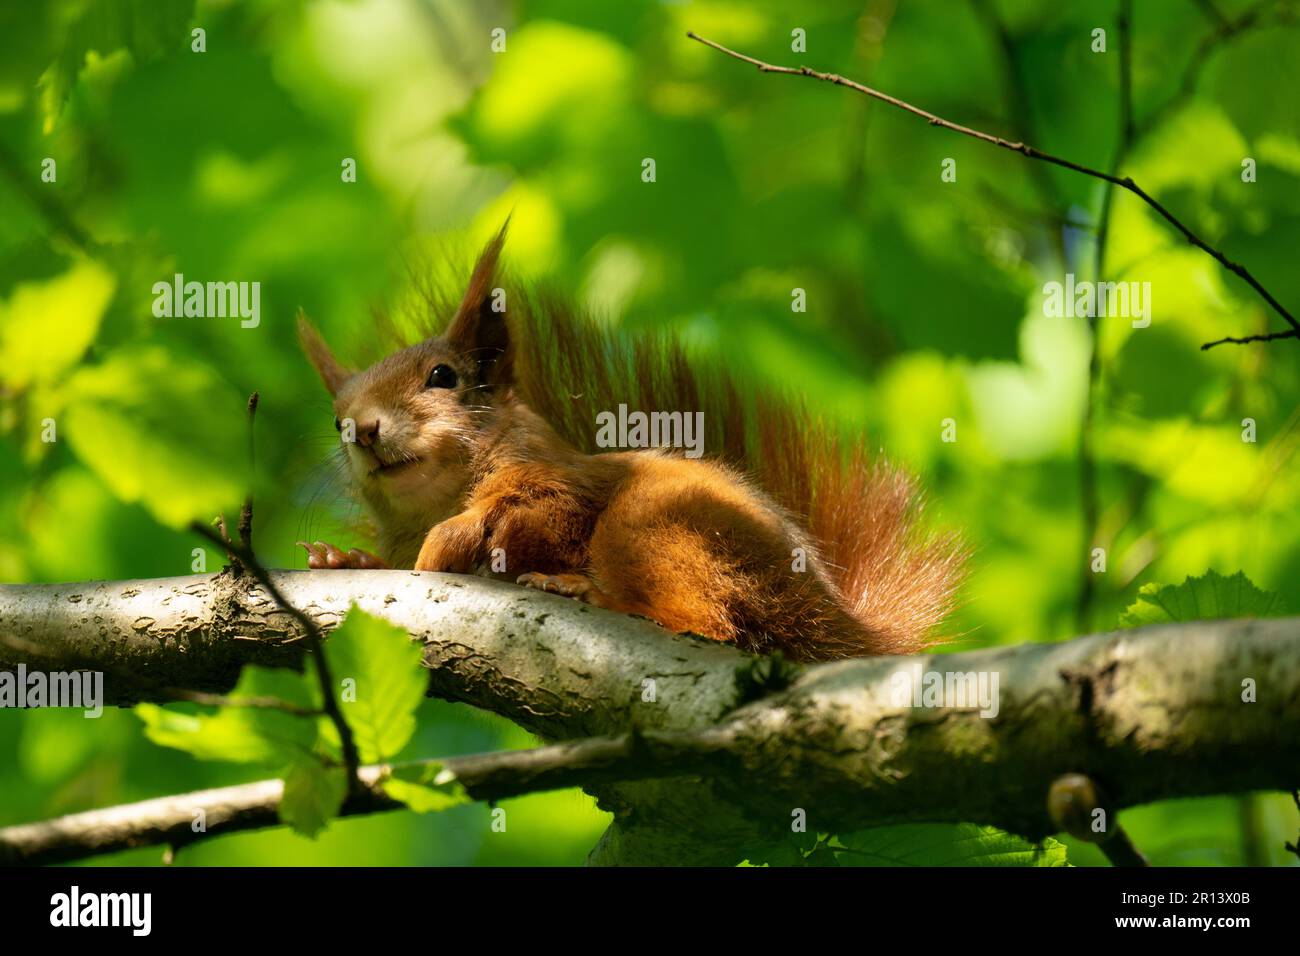 Squirrel sitting on a tree branch in the sunlight Stock Photo